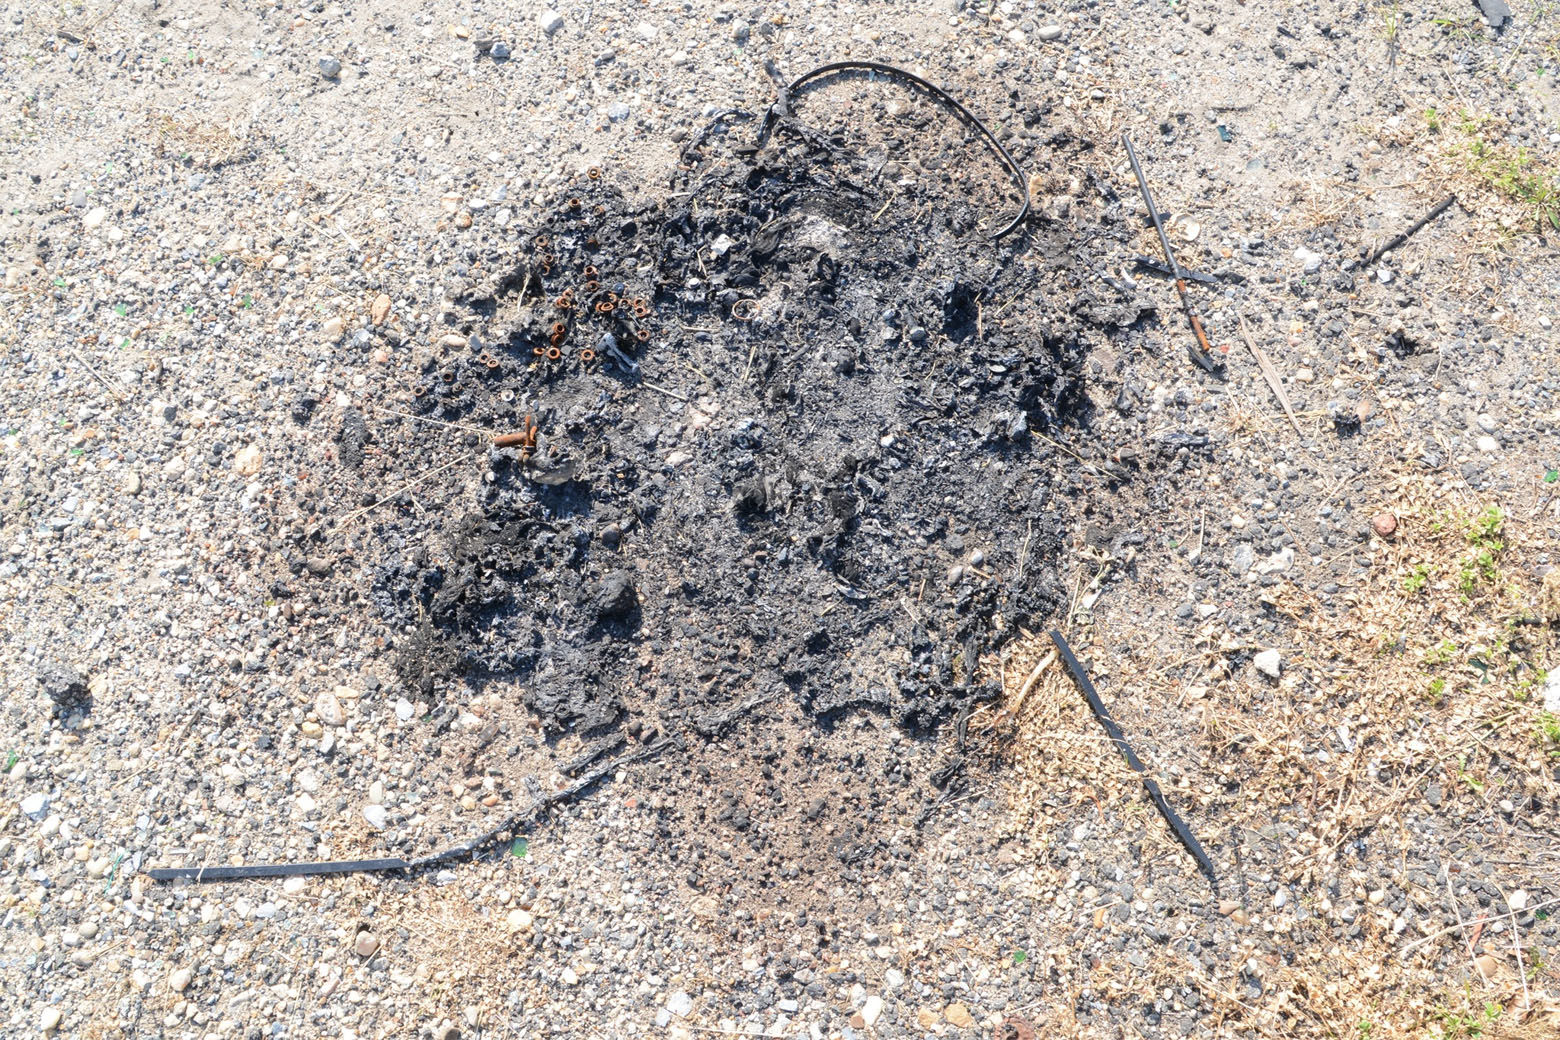 This pile of burned debris was found less than 100 yards from where Daron Wint's blue minivan was found burned in the middle of the night of May 16. Prosecutors argued the metal grommets in the pile of ash -- the rusty-burnt looking circular objects -- were from a drawstring backpack Wint was known to wear. Prosecutors suggested Wint may also have burned other evidence. (Courtesy U.S. Attorney's Office for D.C.)